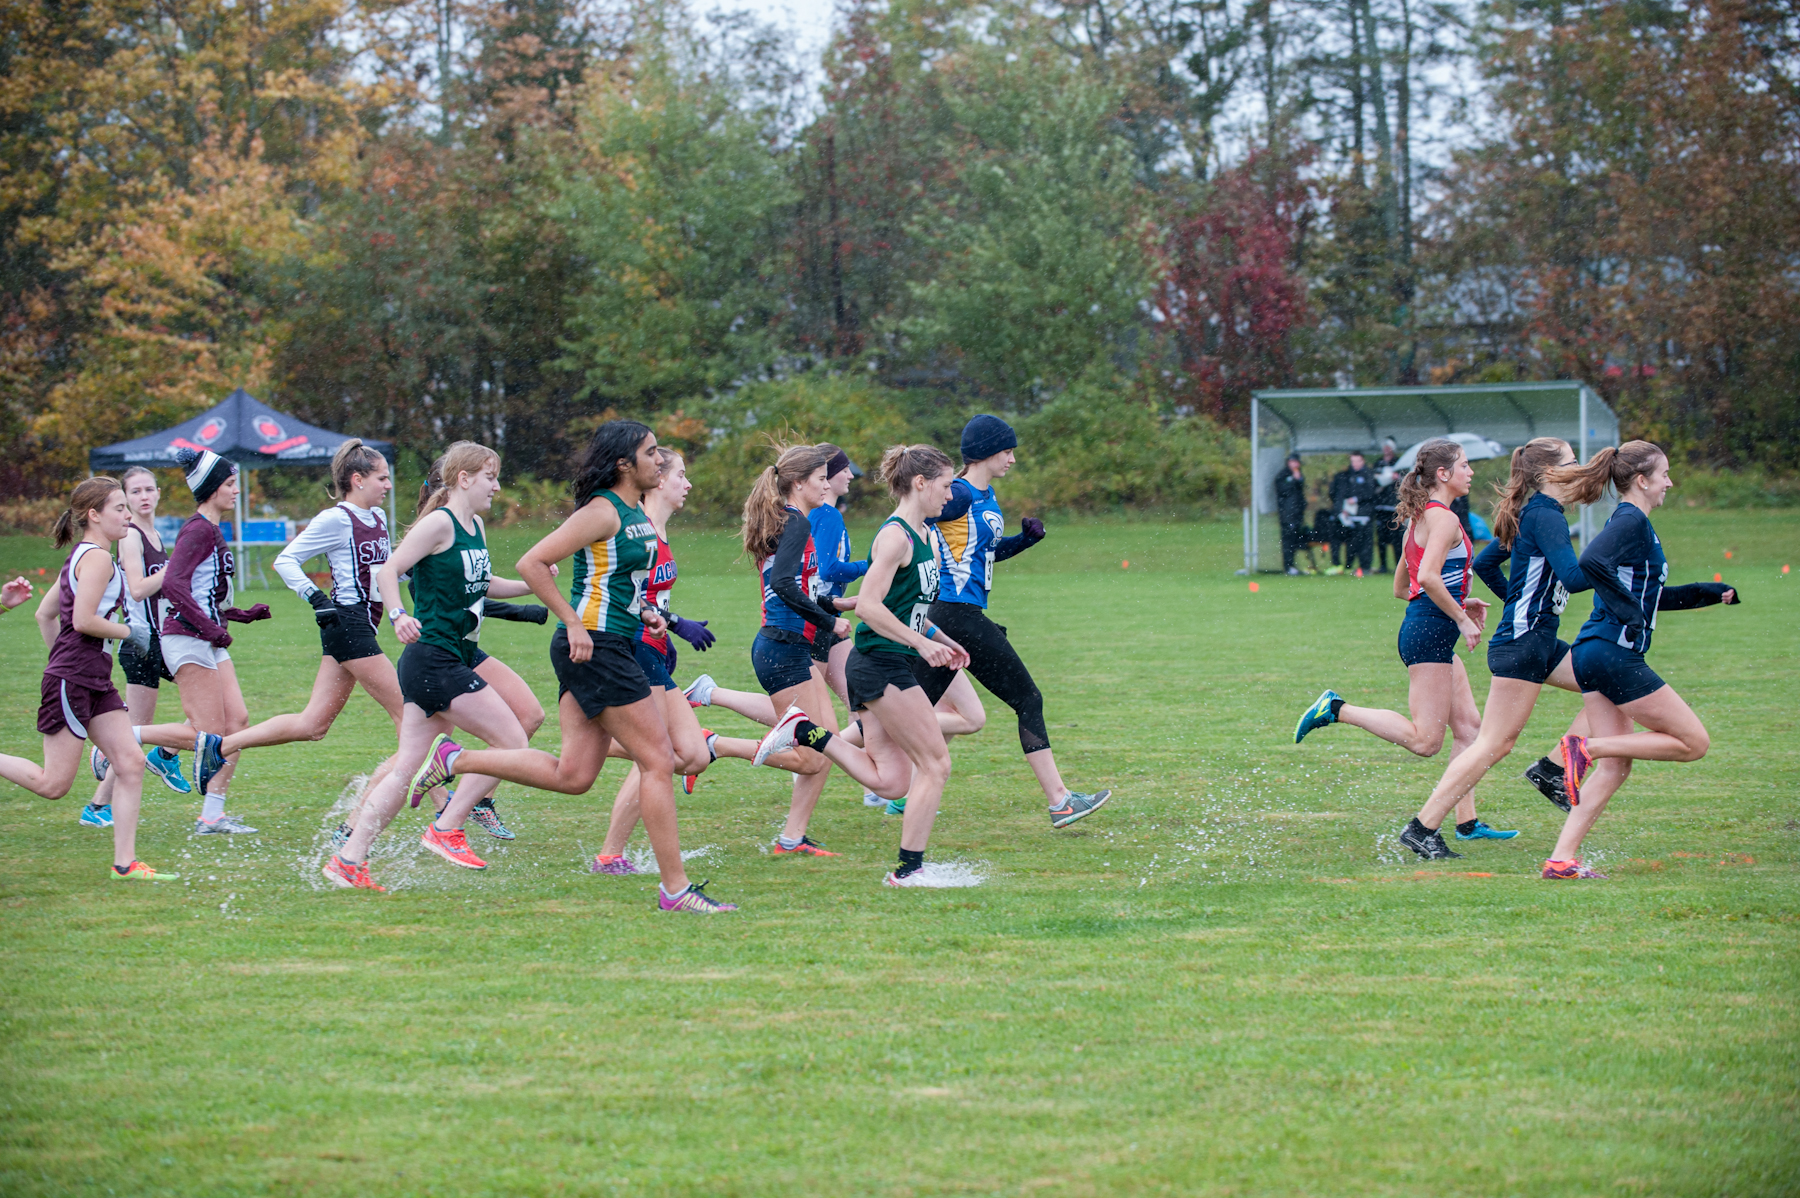 AUS Cross Country Invitationals - hosted by UPEI and Montreal